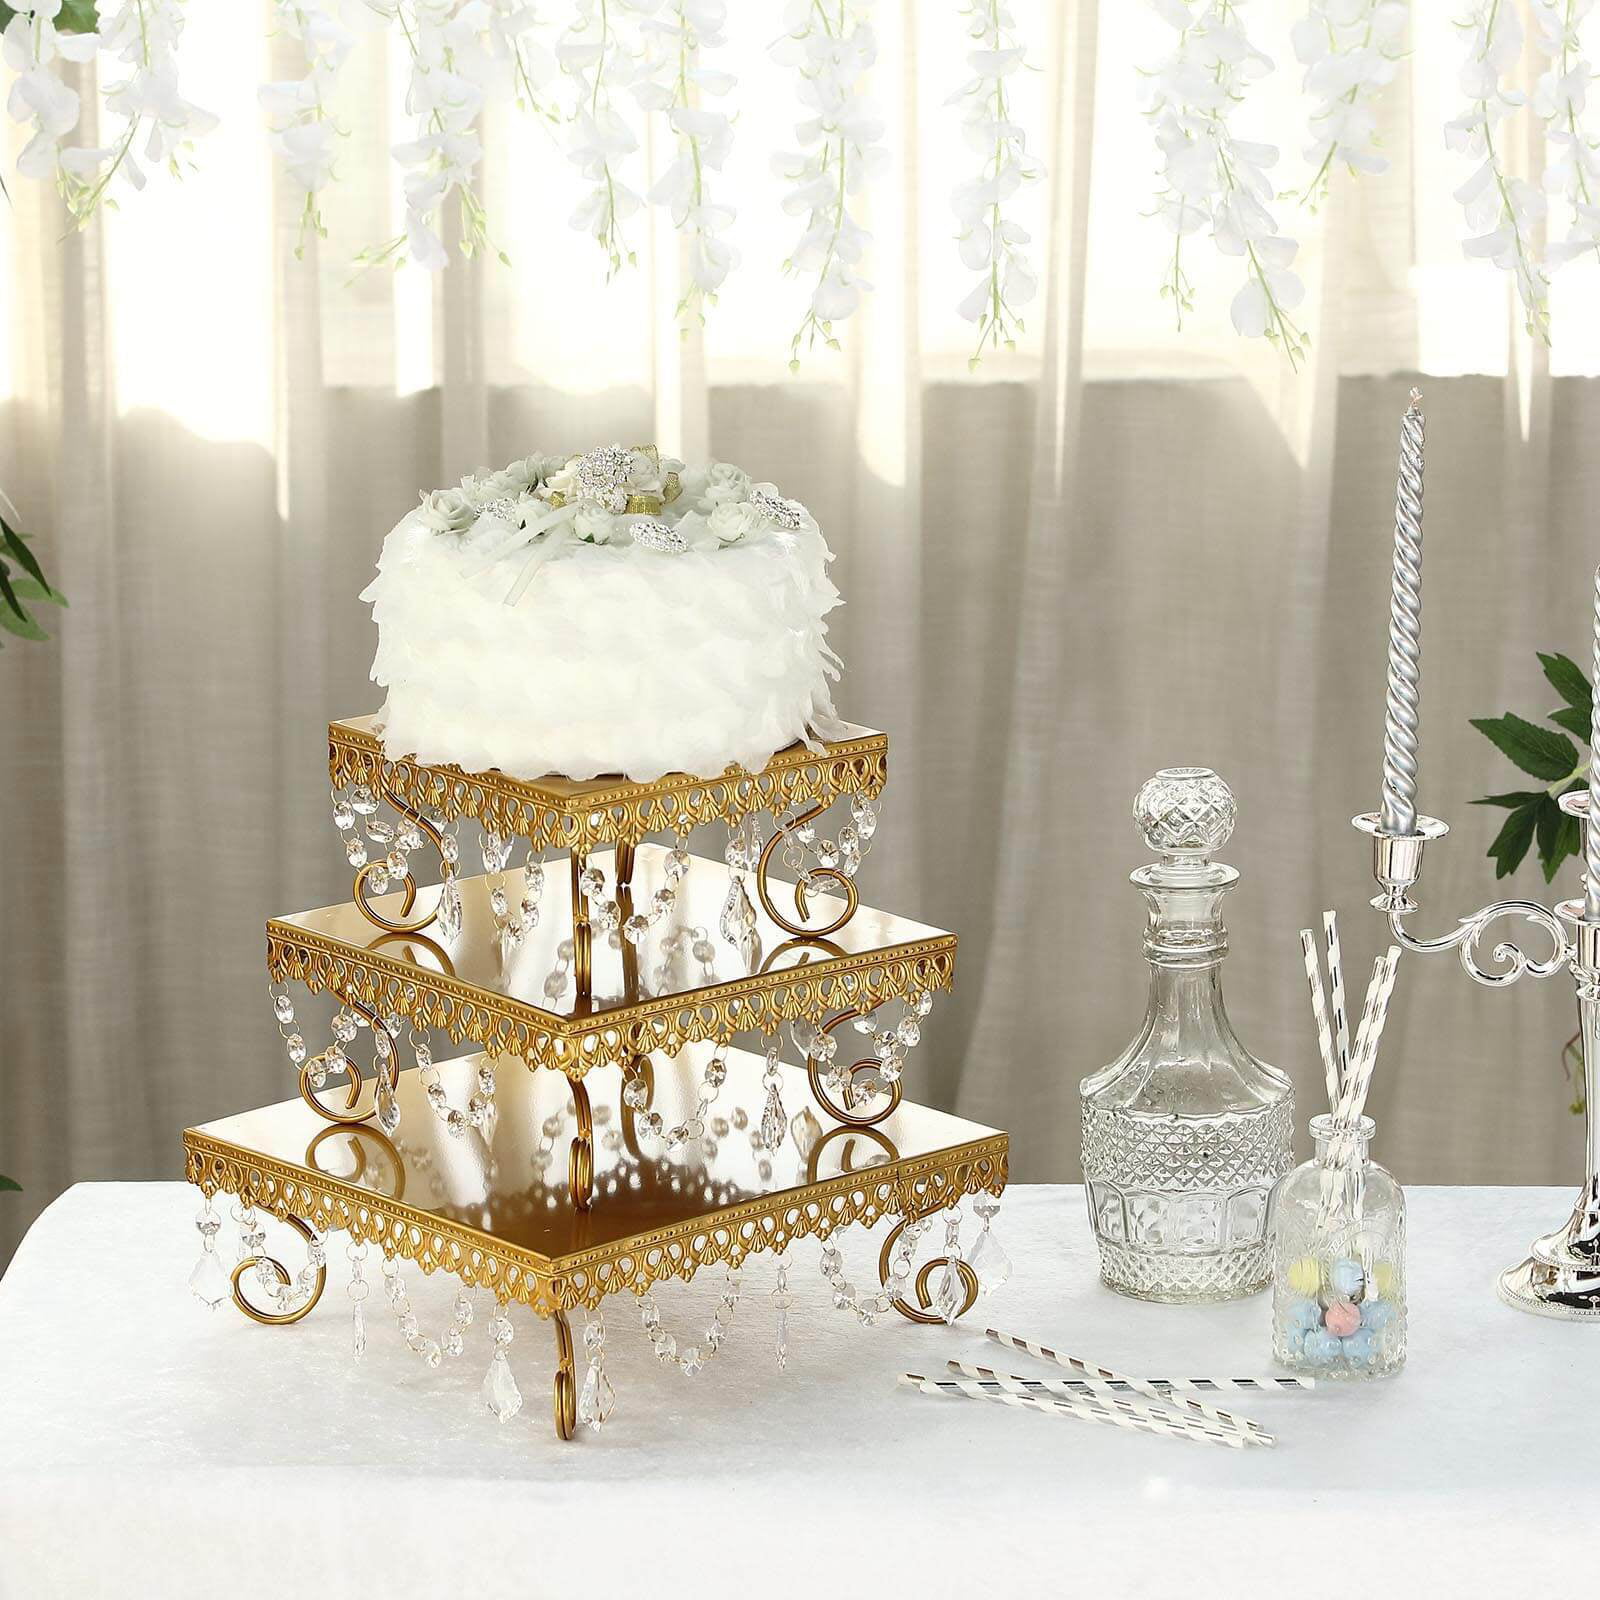 Stainless Steel Gold Cupcake Stand-Gold Dessert Stand-Gold Cake Stand-3 Tiered Cake Stand for Wedding